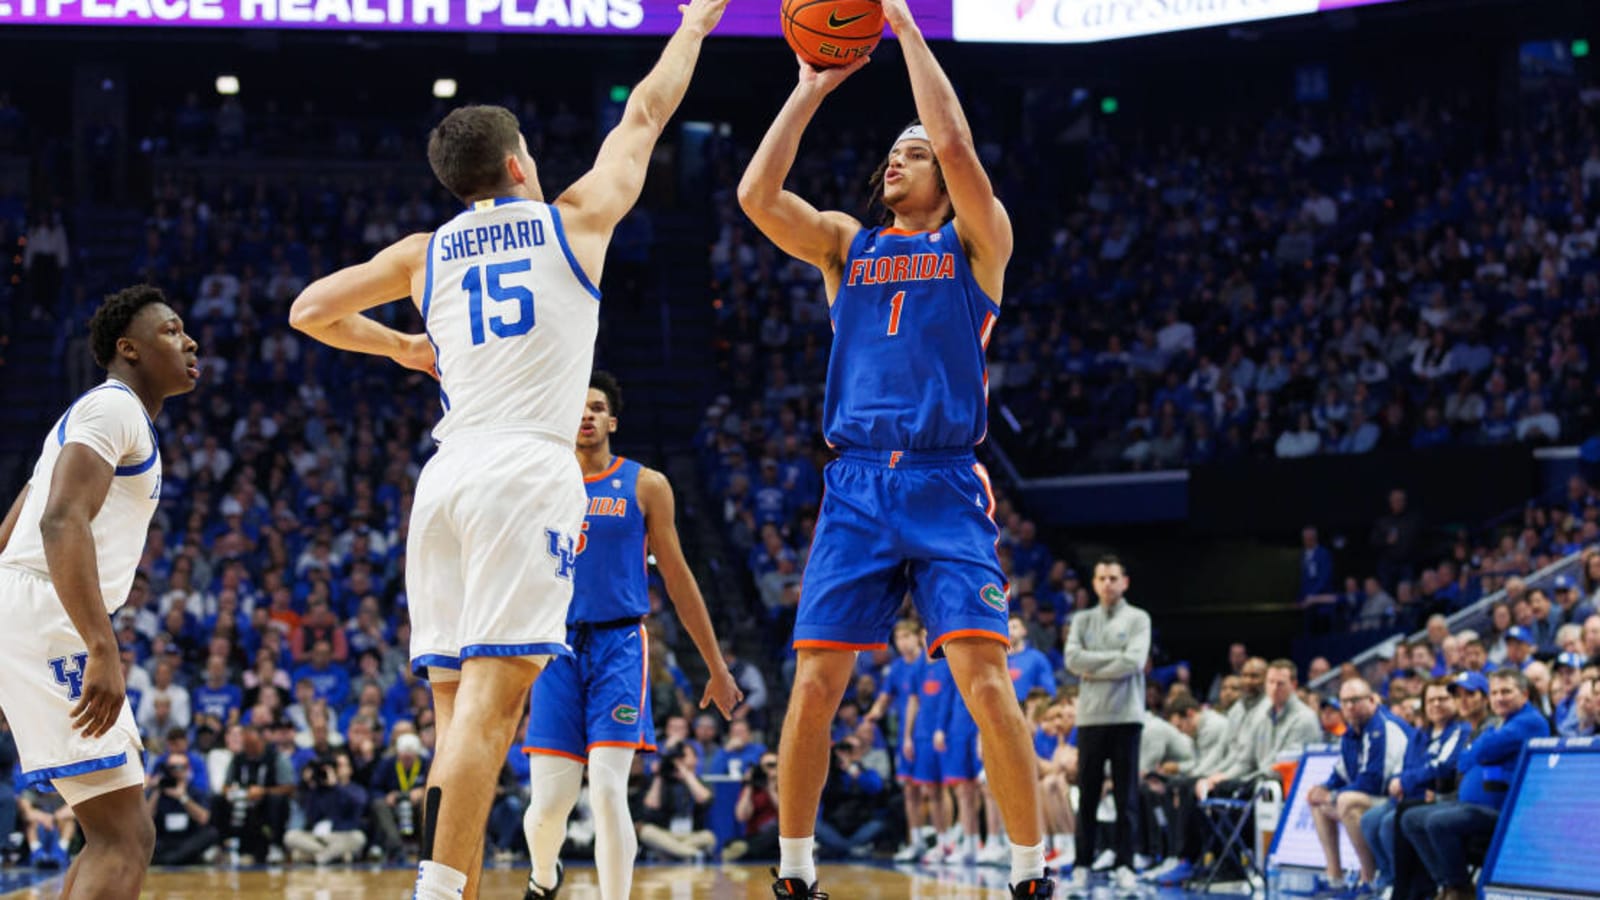 Halftime thoughts as Kentucky leads Florida by five